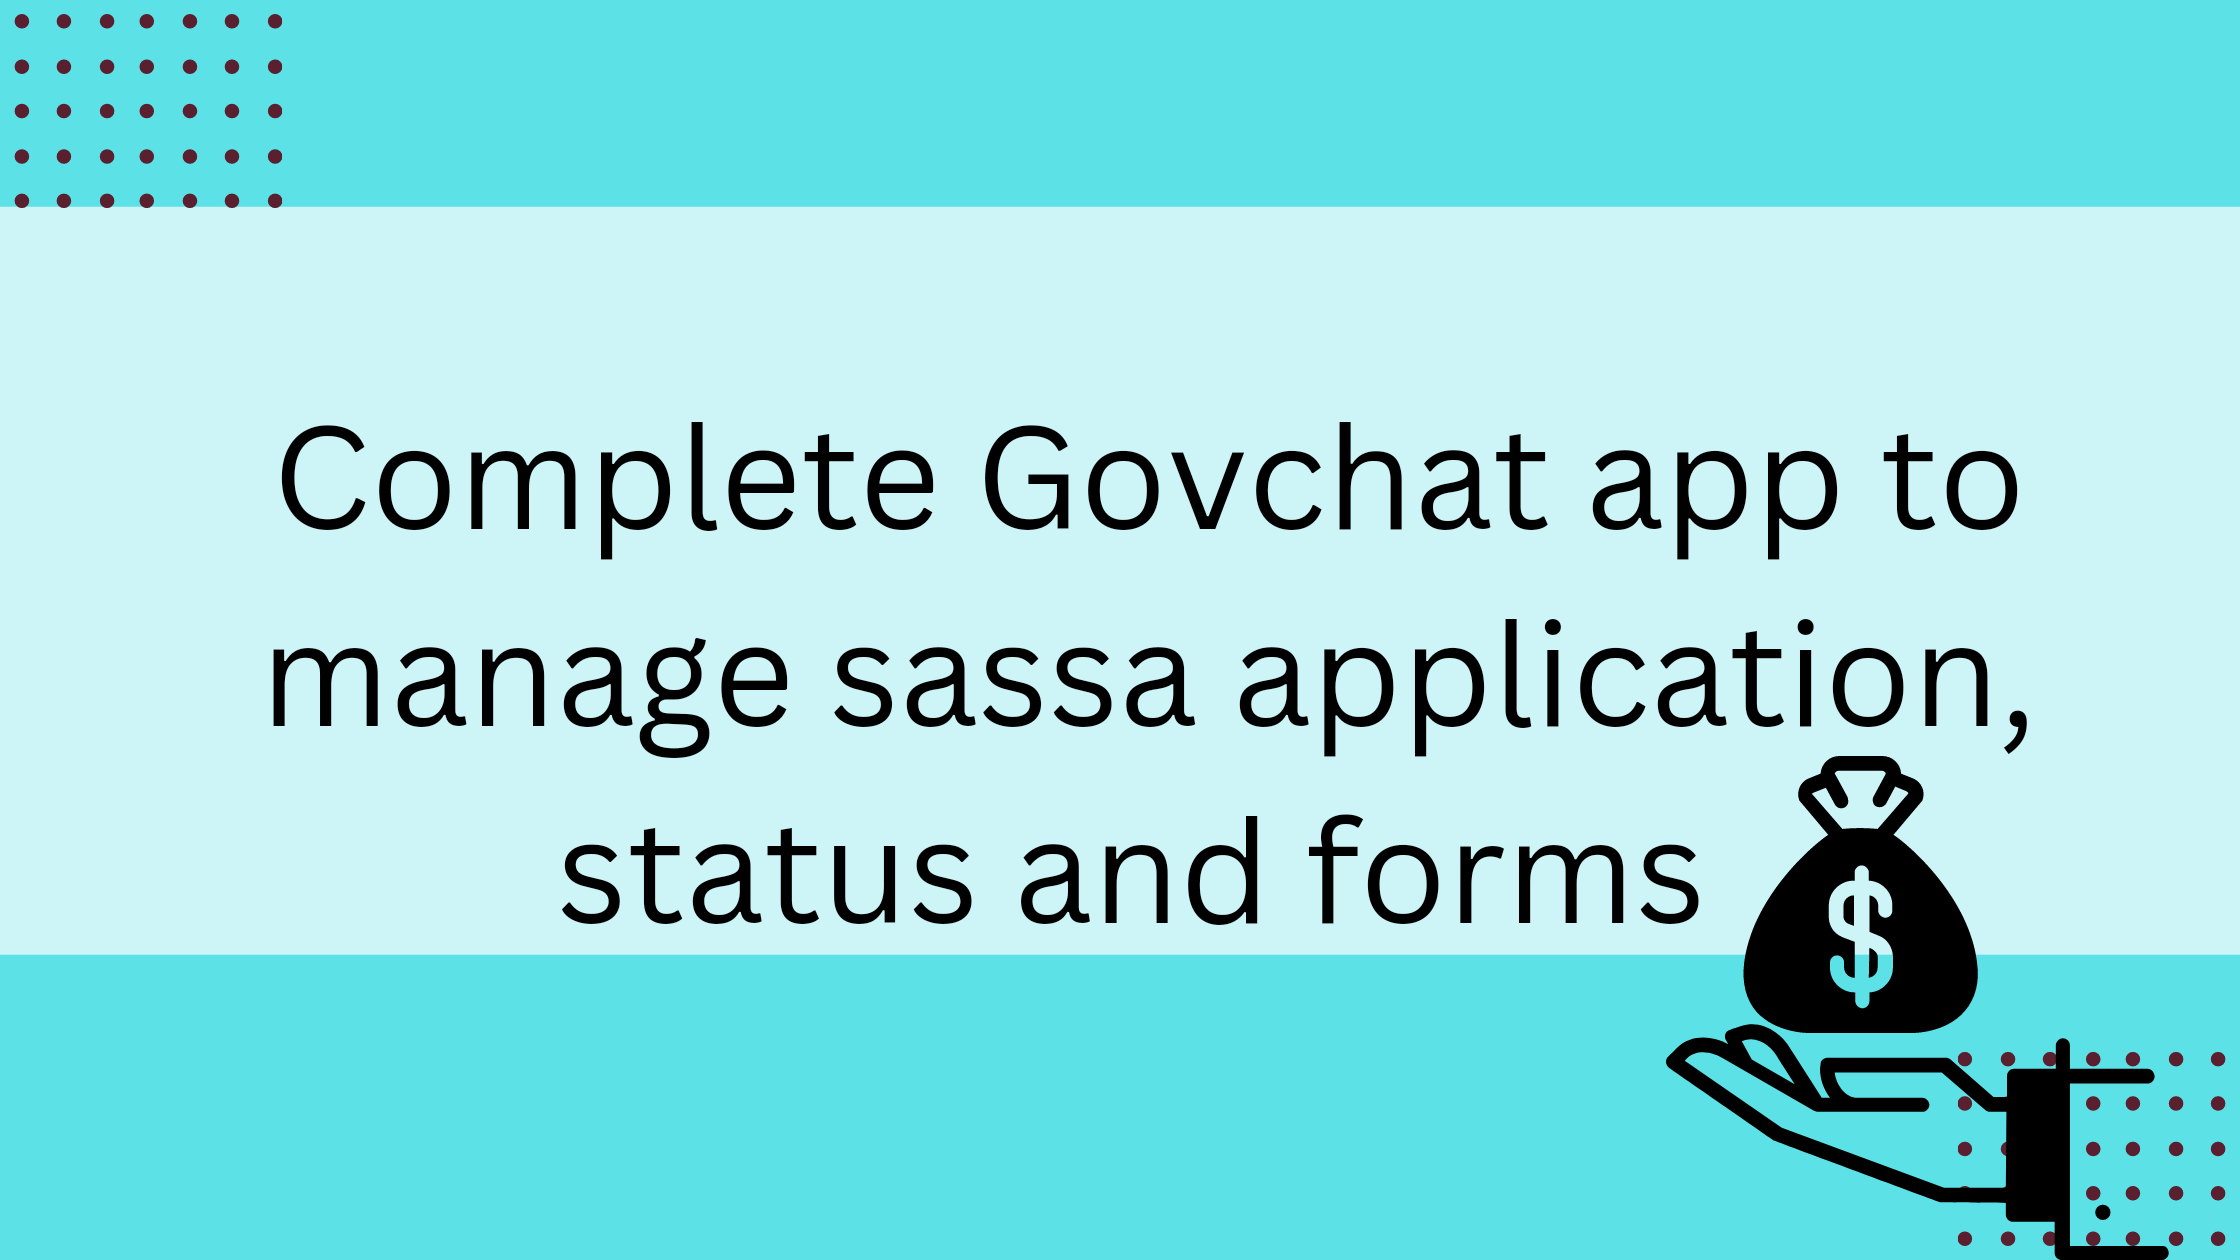 Complete Govchat app to manage sassa application, status and forms